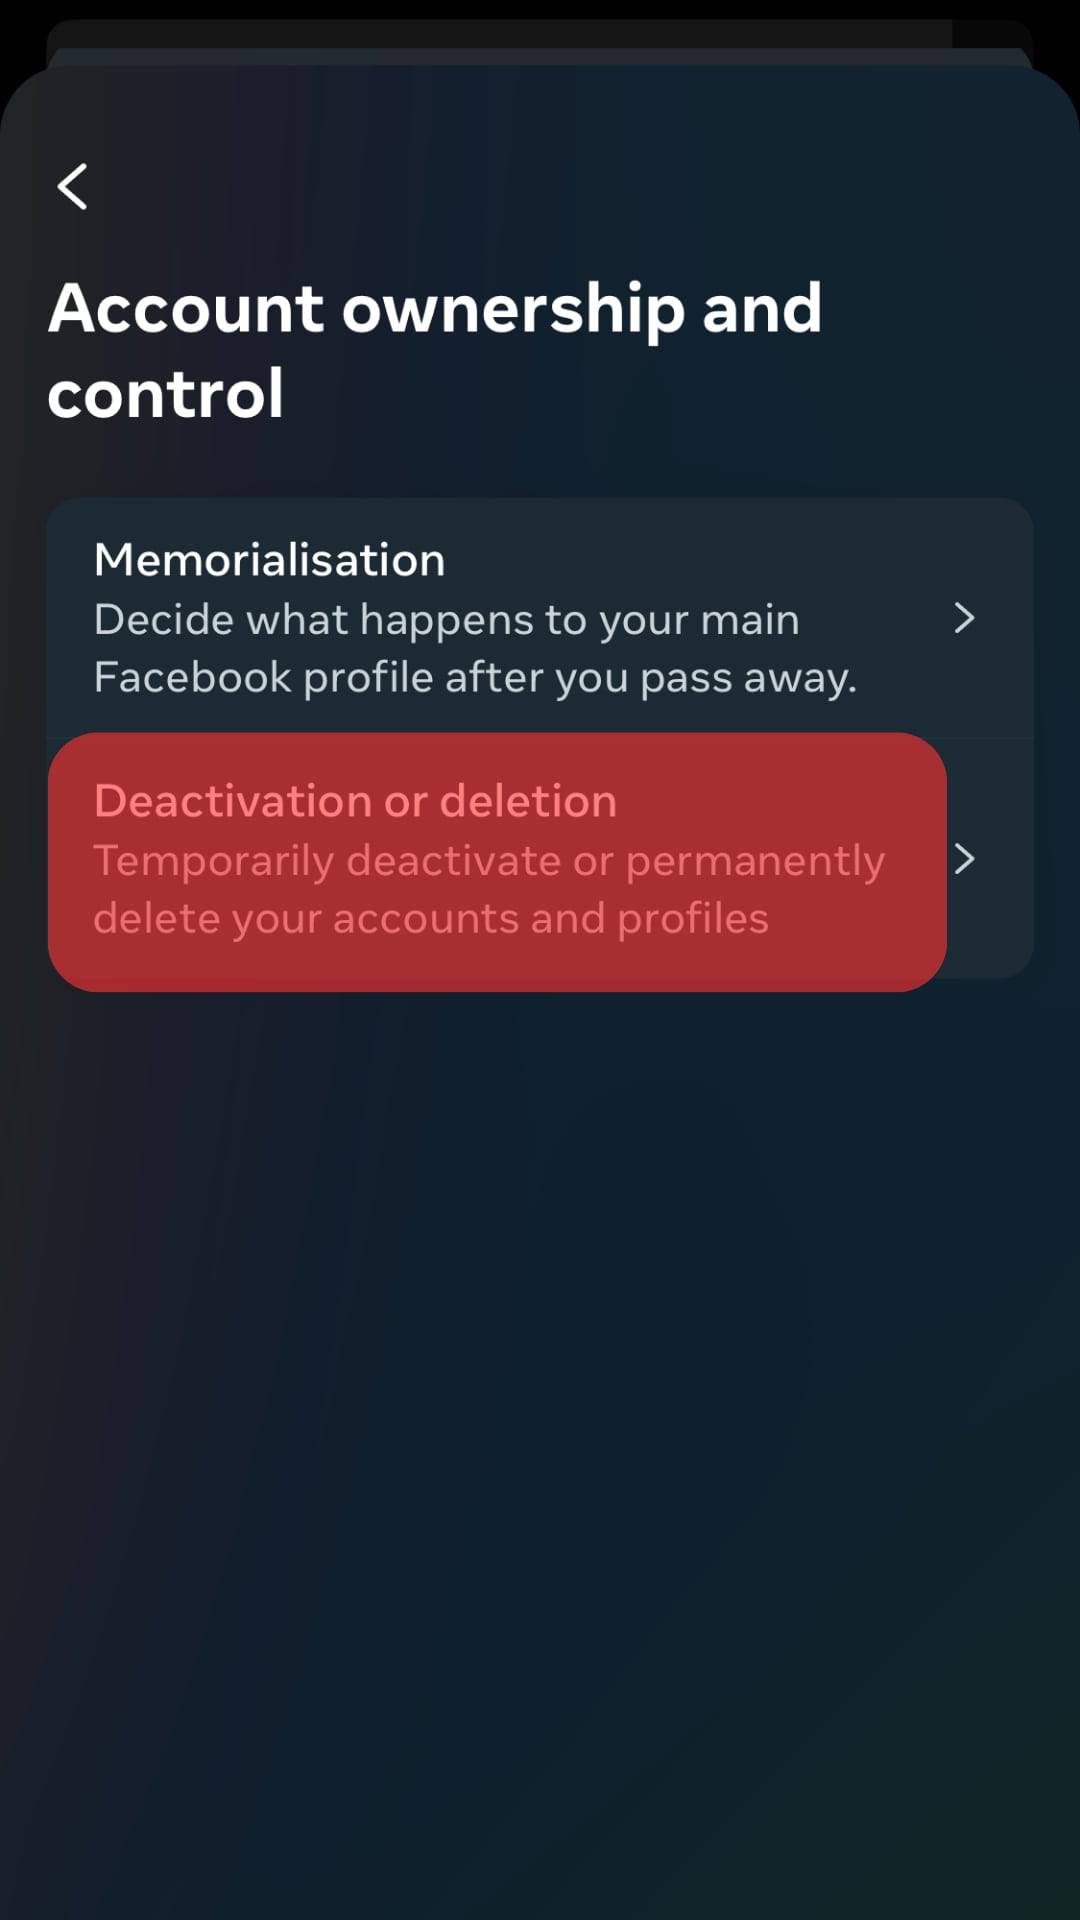 Tap On Deactivation And Deletion.